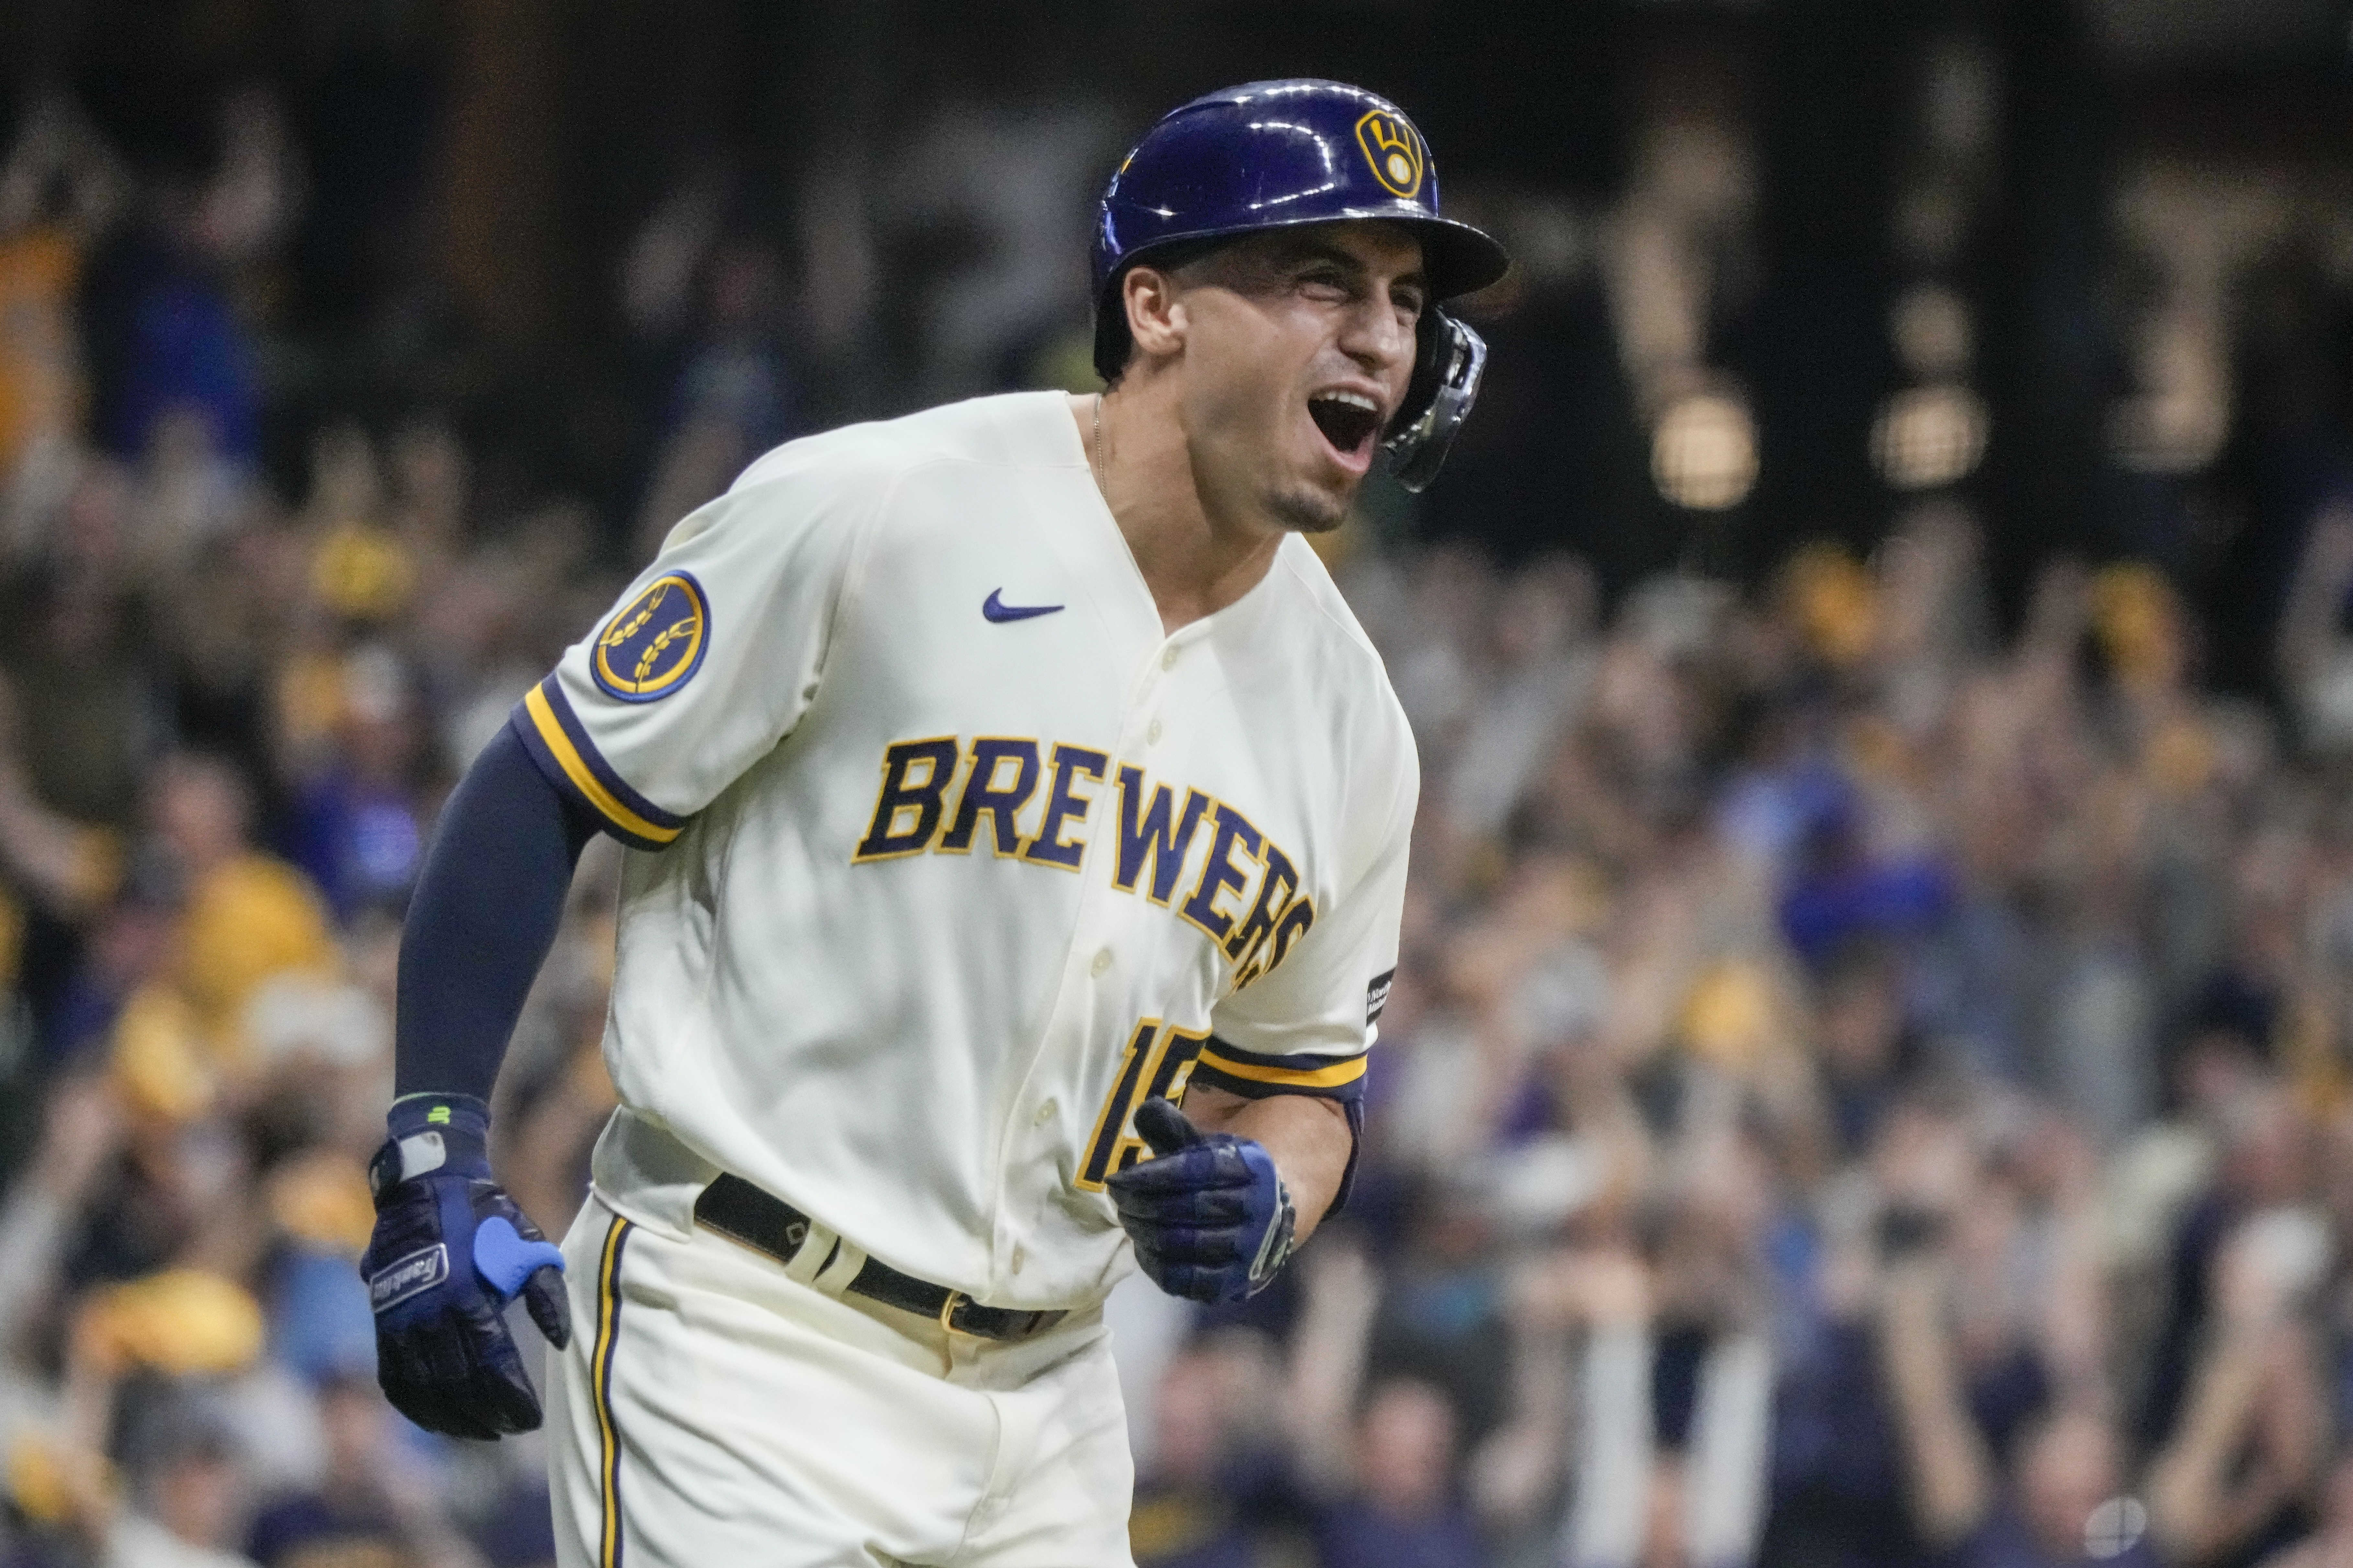 Adames leads Brewers to 6-1 victory over Cardinals - NBC Sports